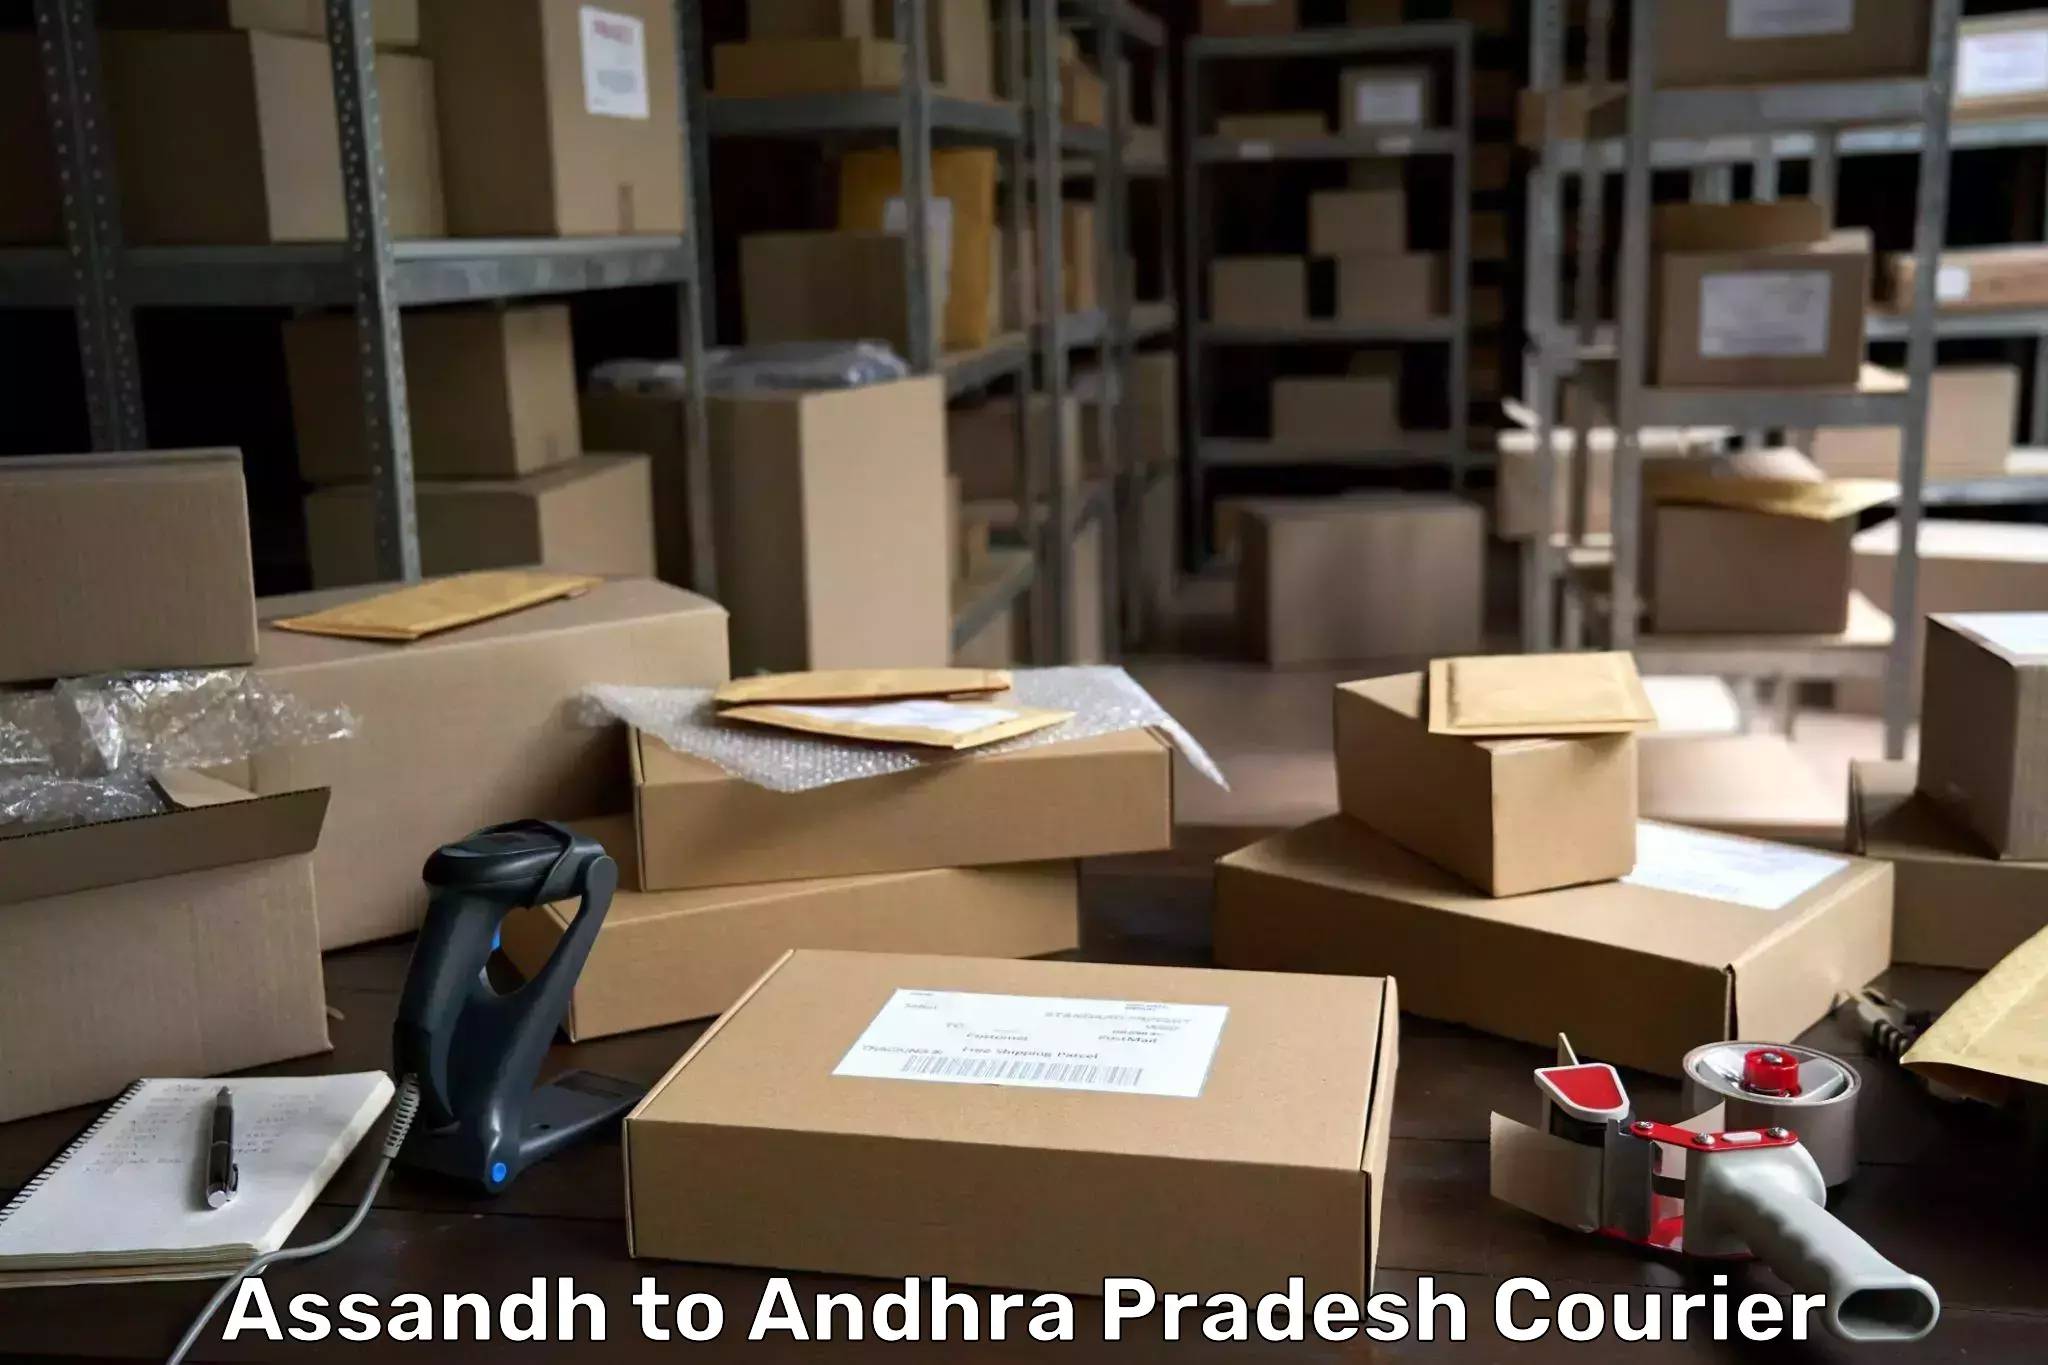 Express package delivery Assandh to Visakhapatnam Port